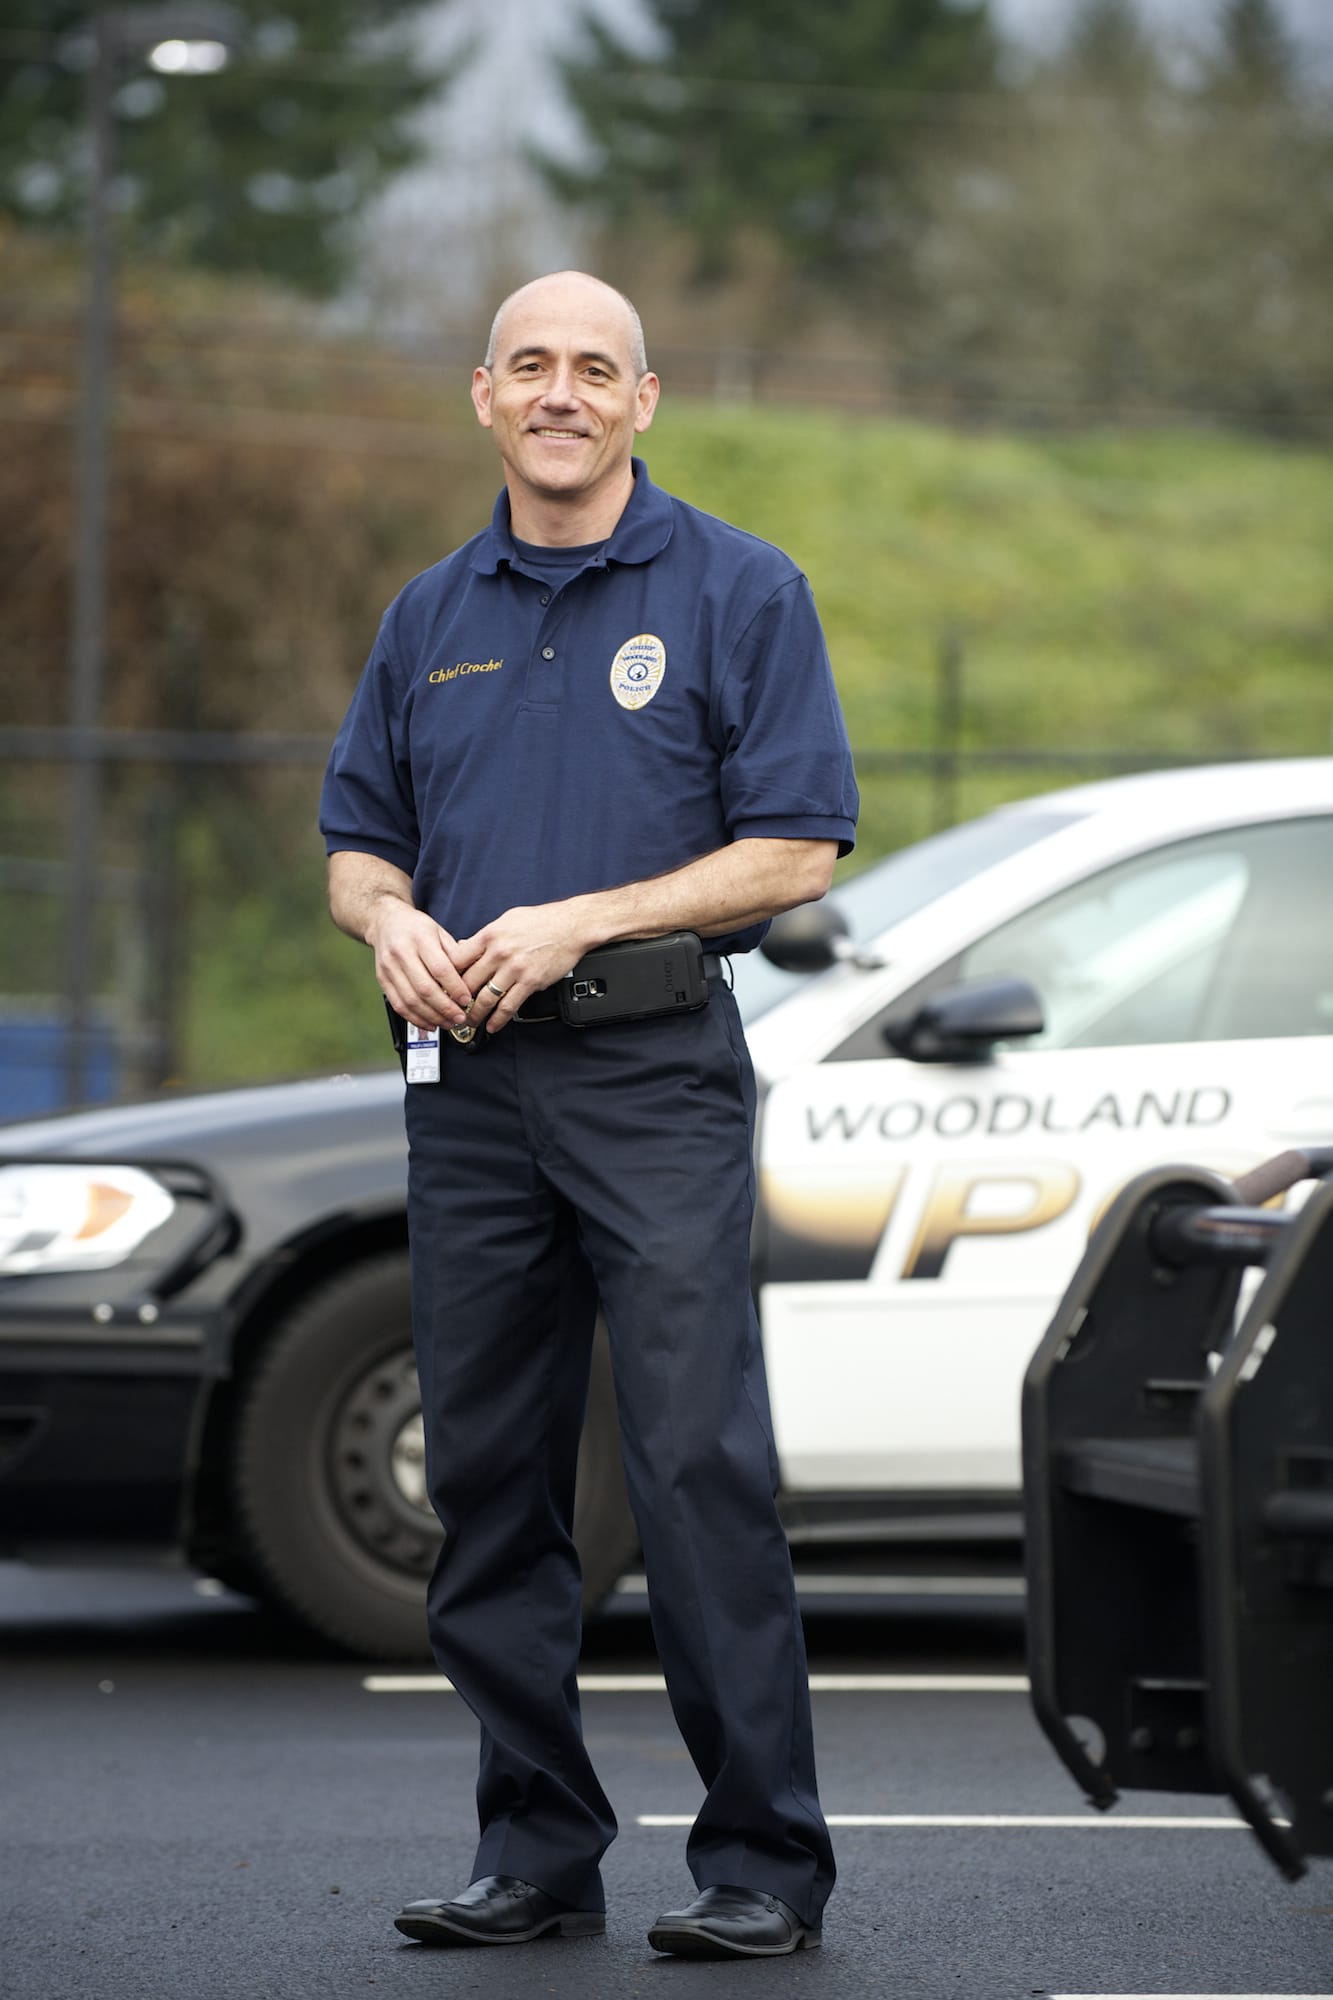 Woodland's new police chief, Phil Crochet, started the job this month.